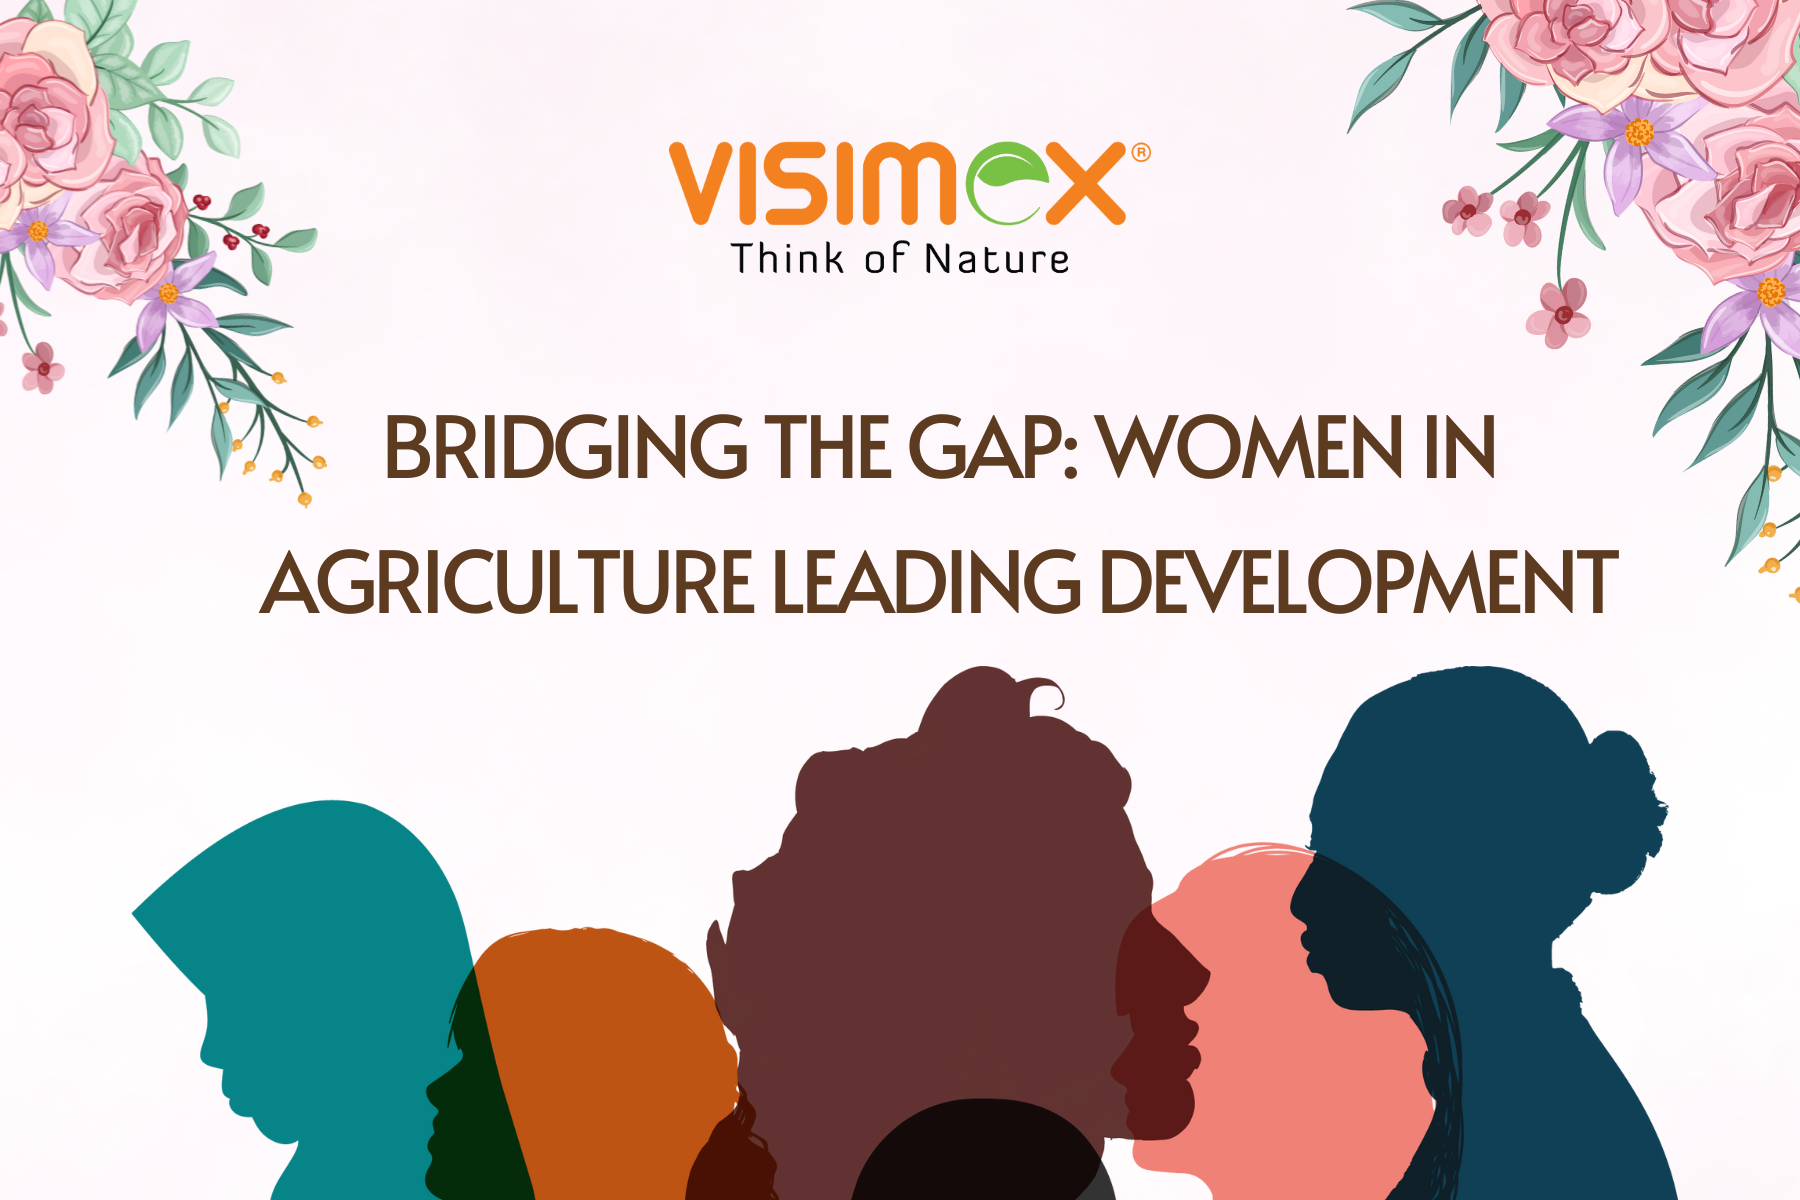 Bridging the Gap: Women in Agriculture Leading Development